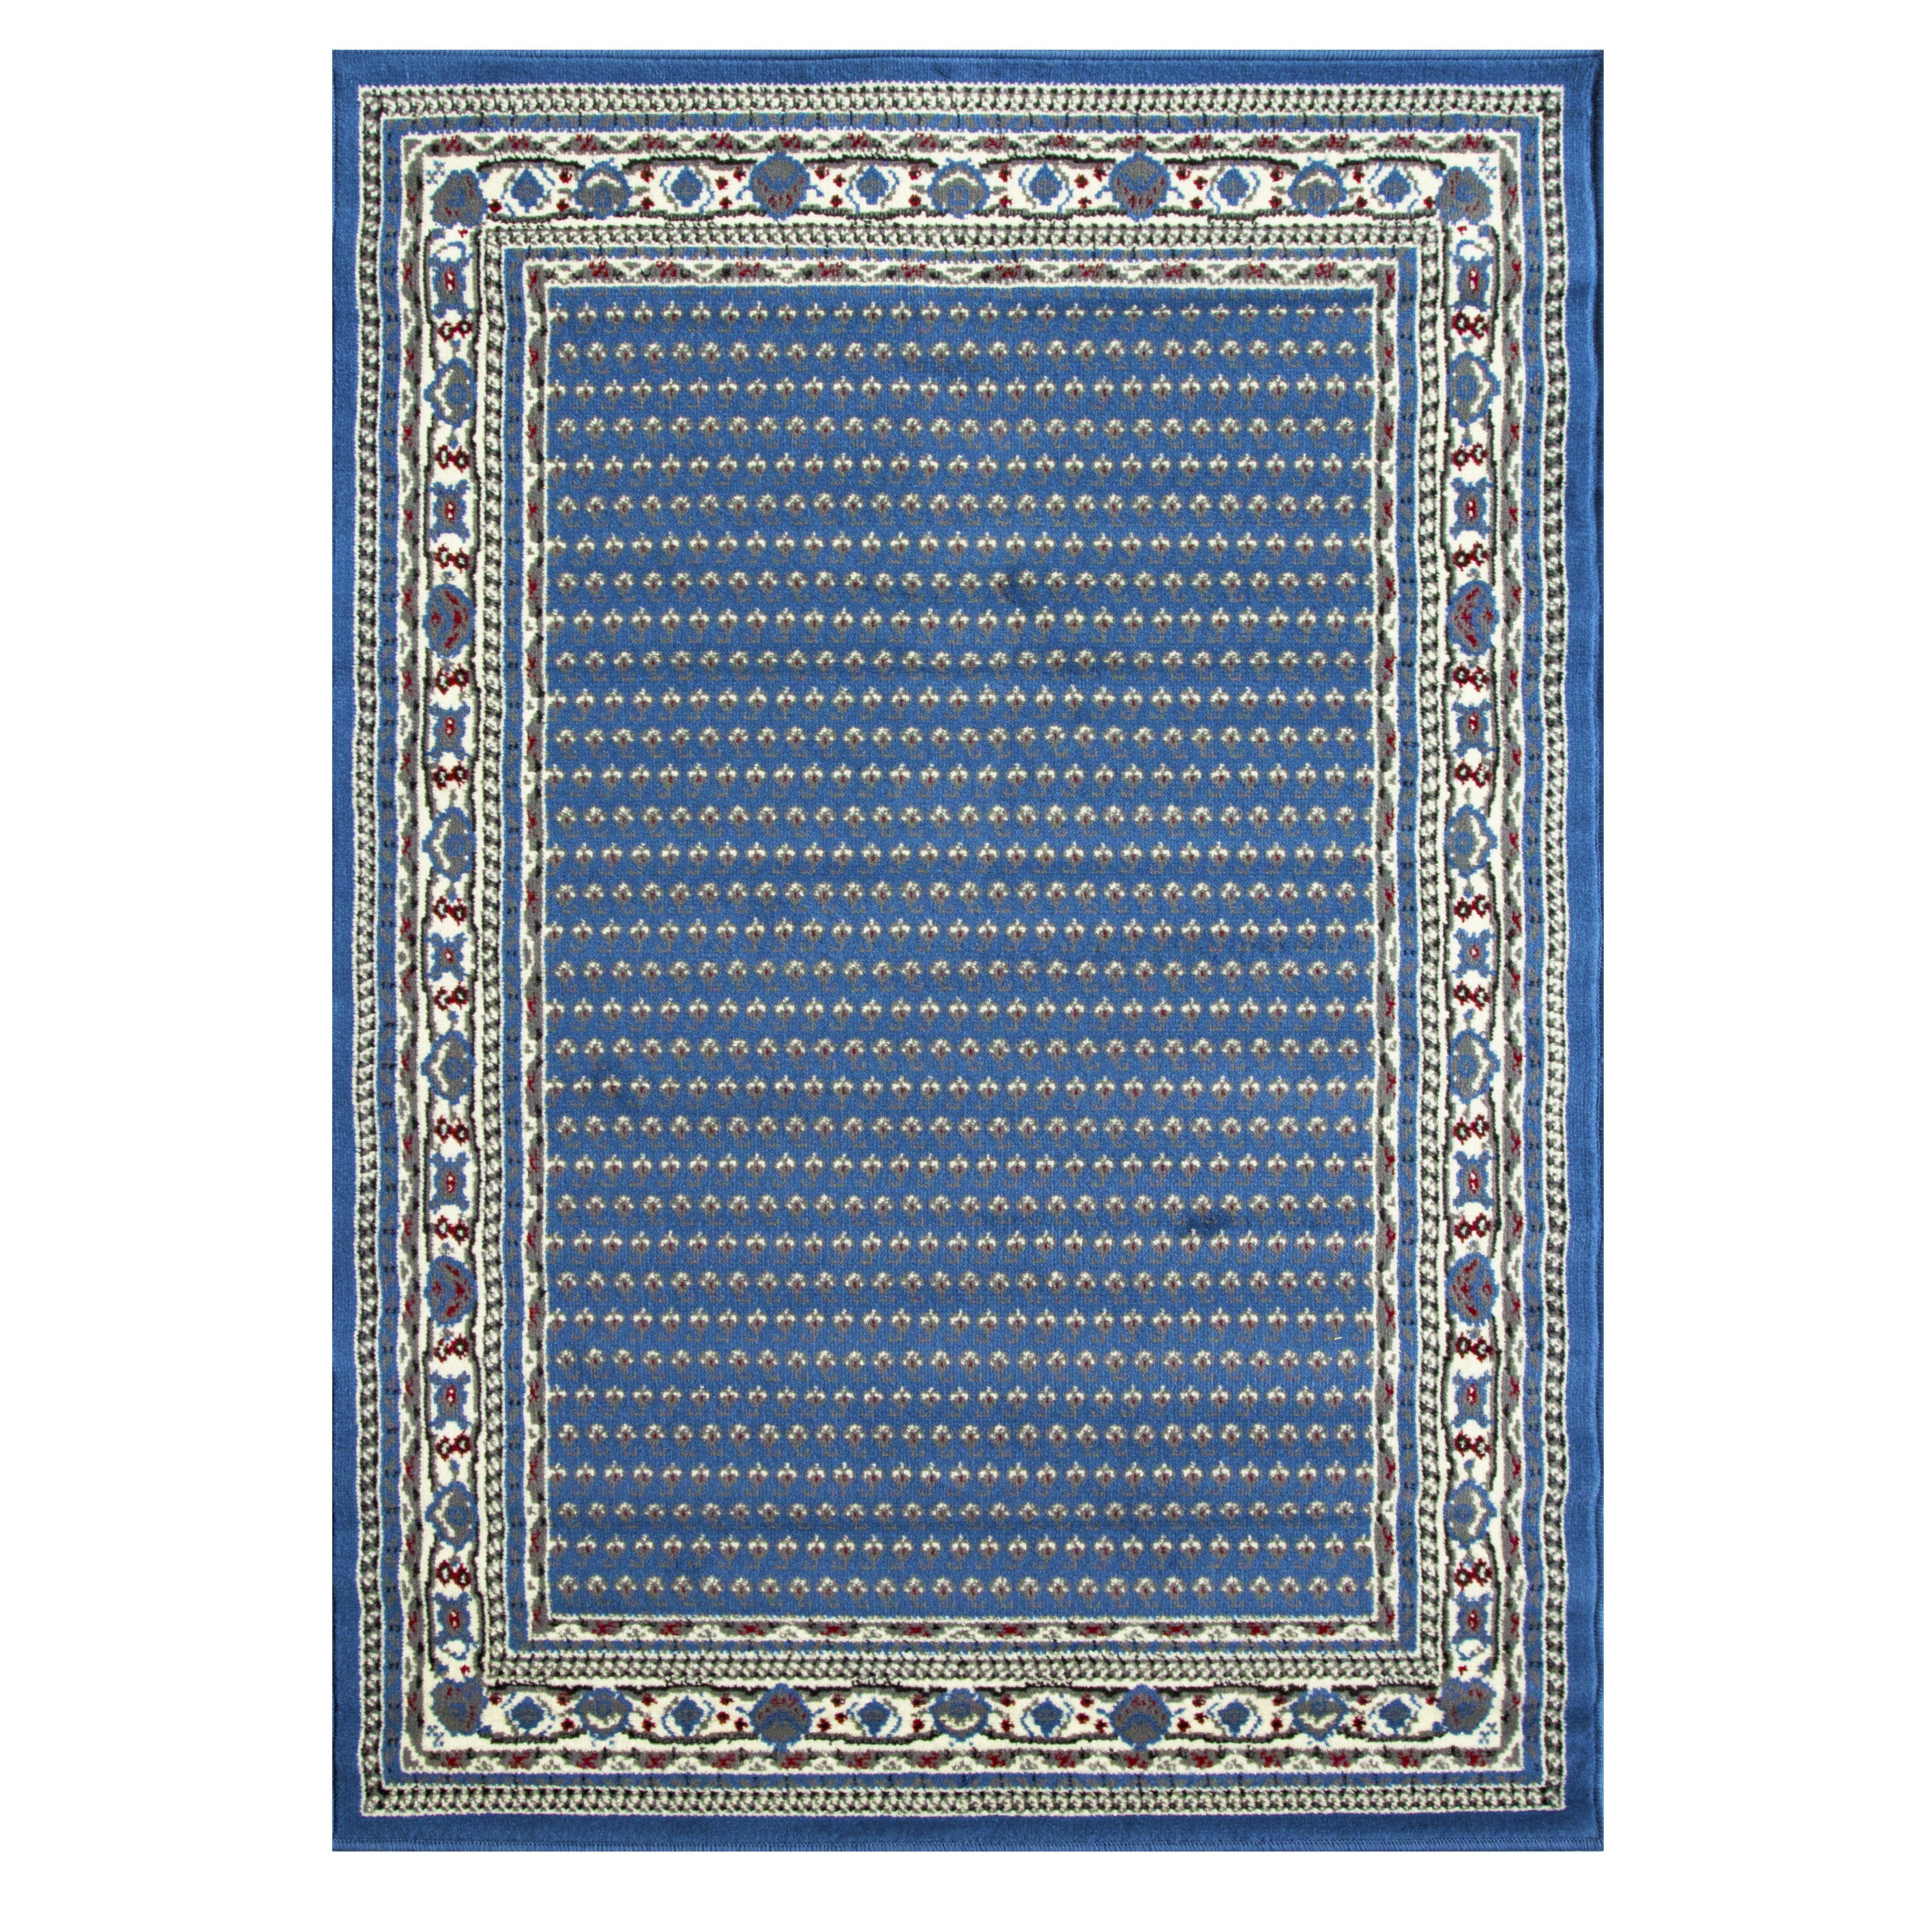 Traditional Living Room Rugs New Blue Bordered Traditional Living Room Rug